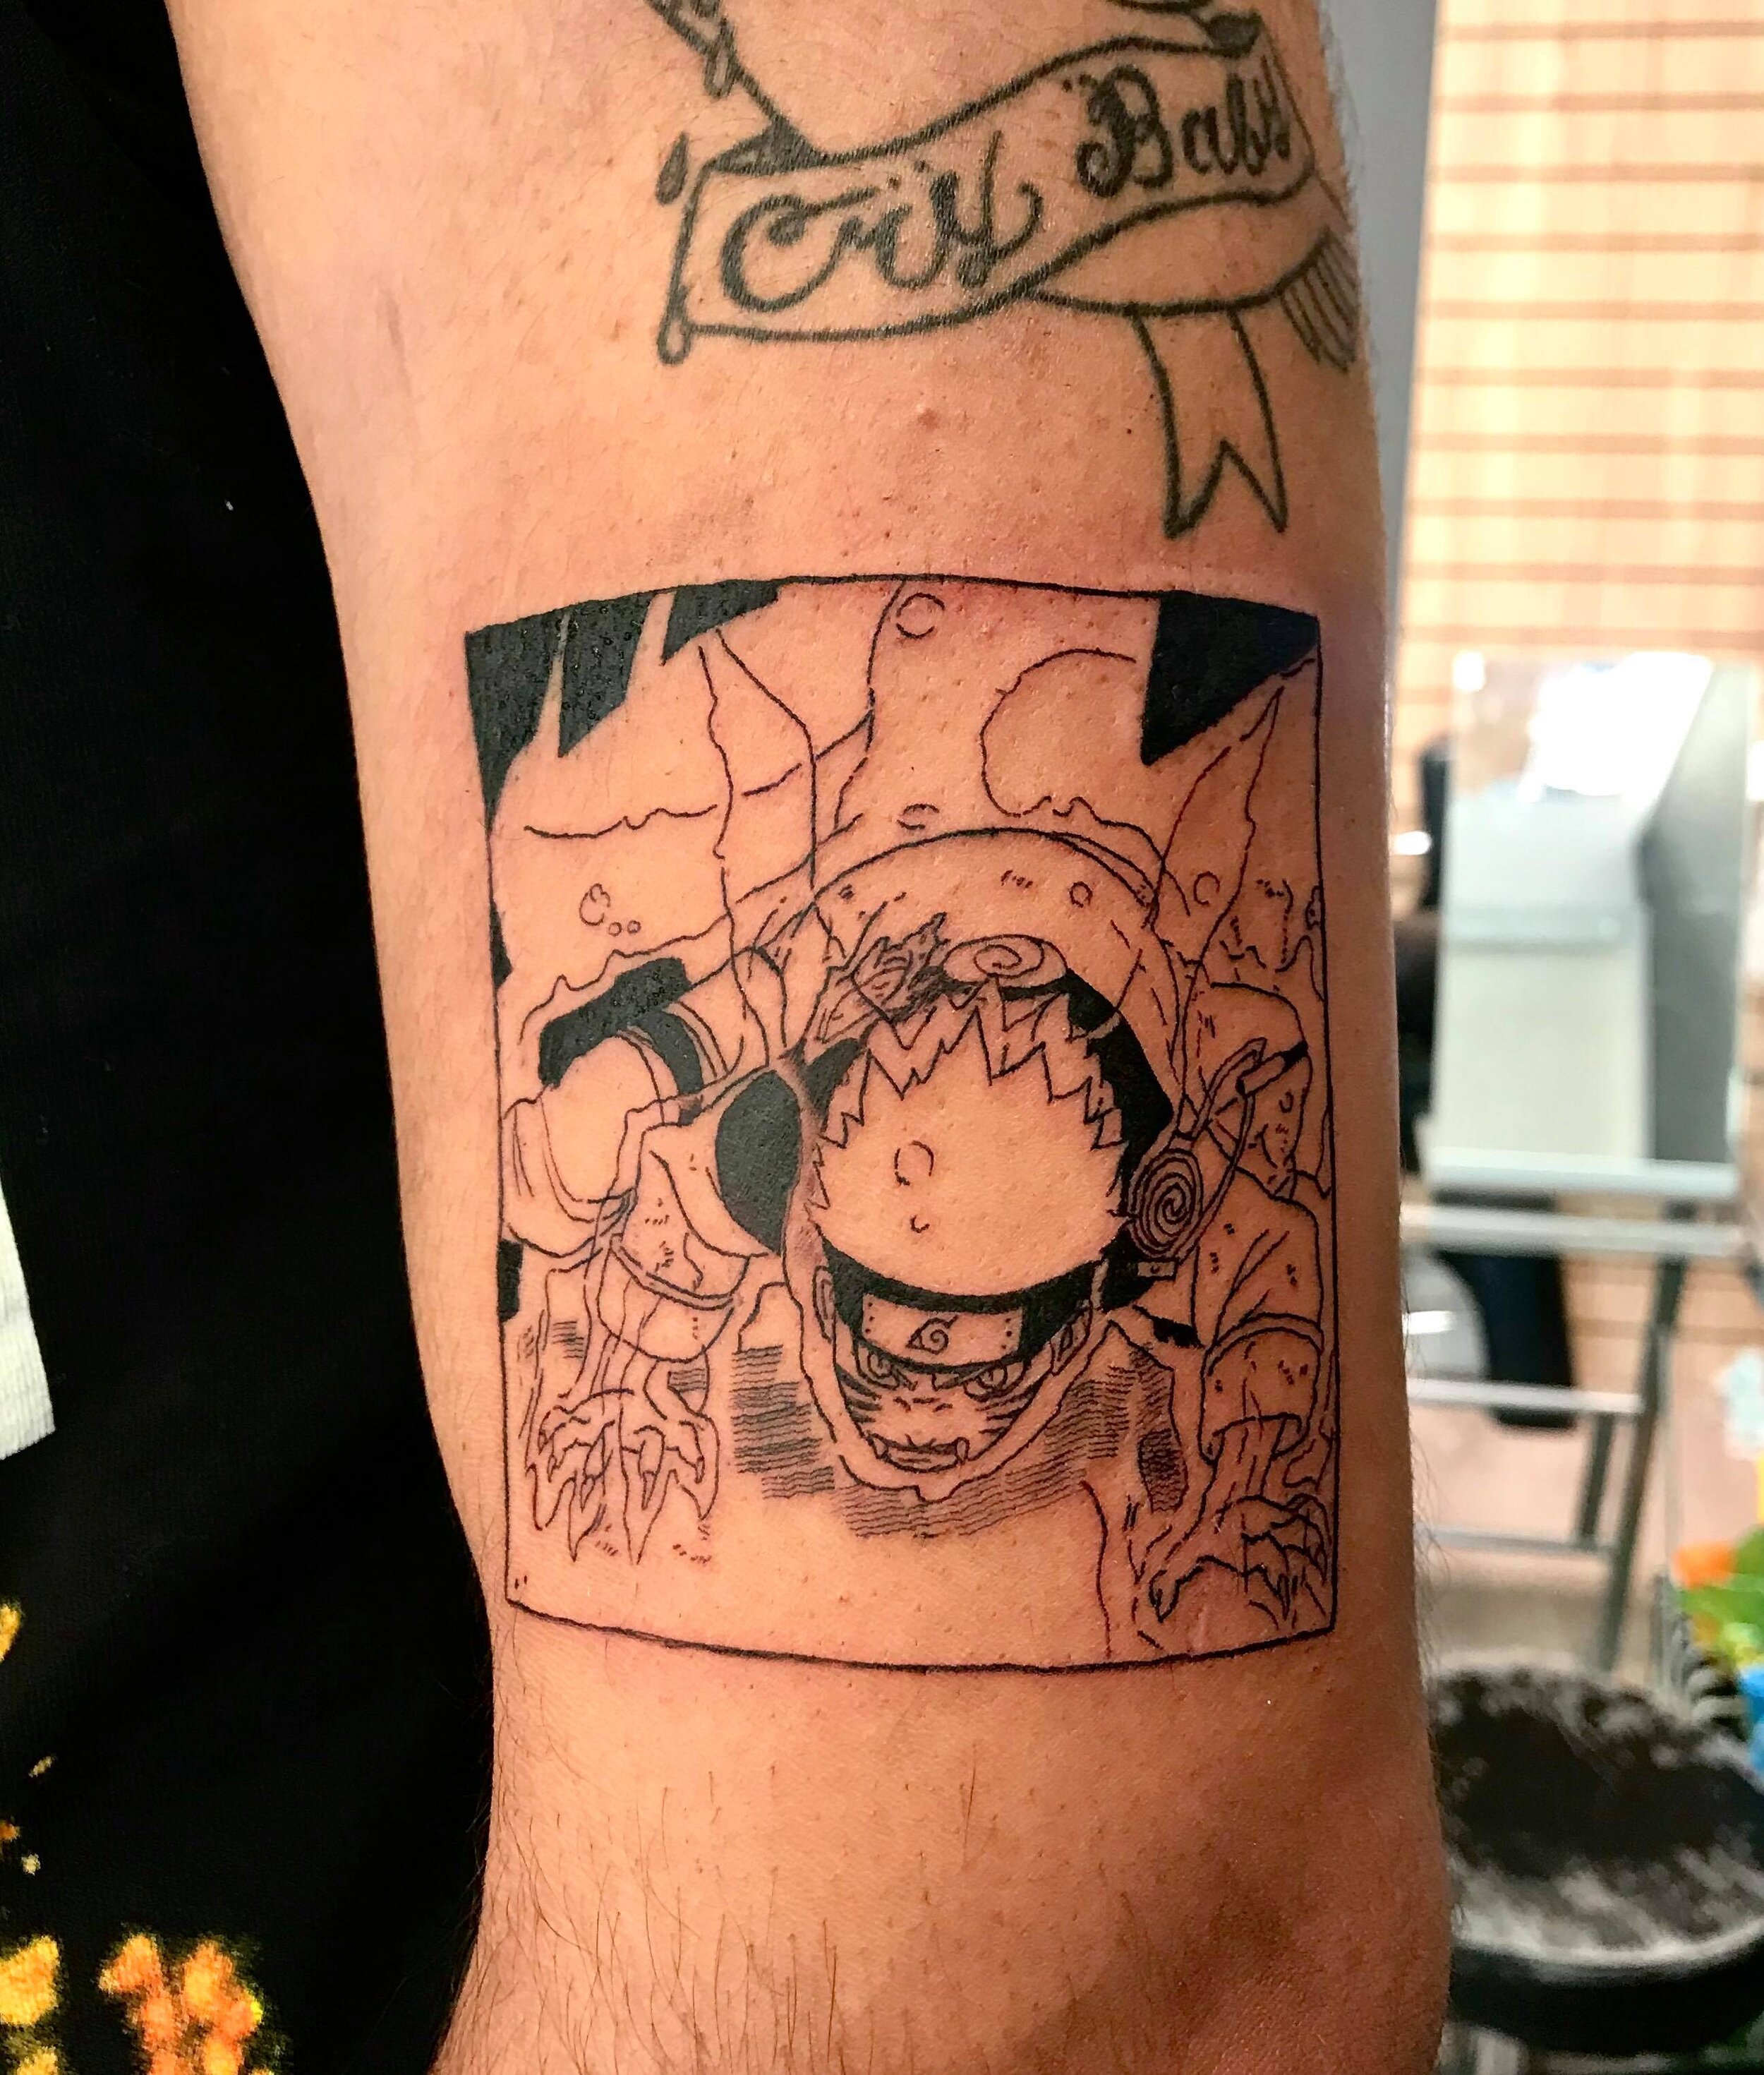 Just got this one piece tattoo memories of going merry  rOnePiece